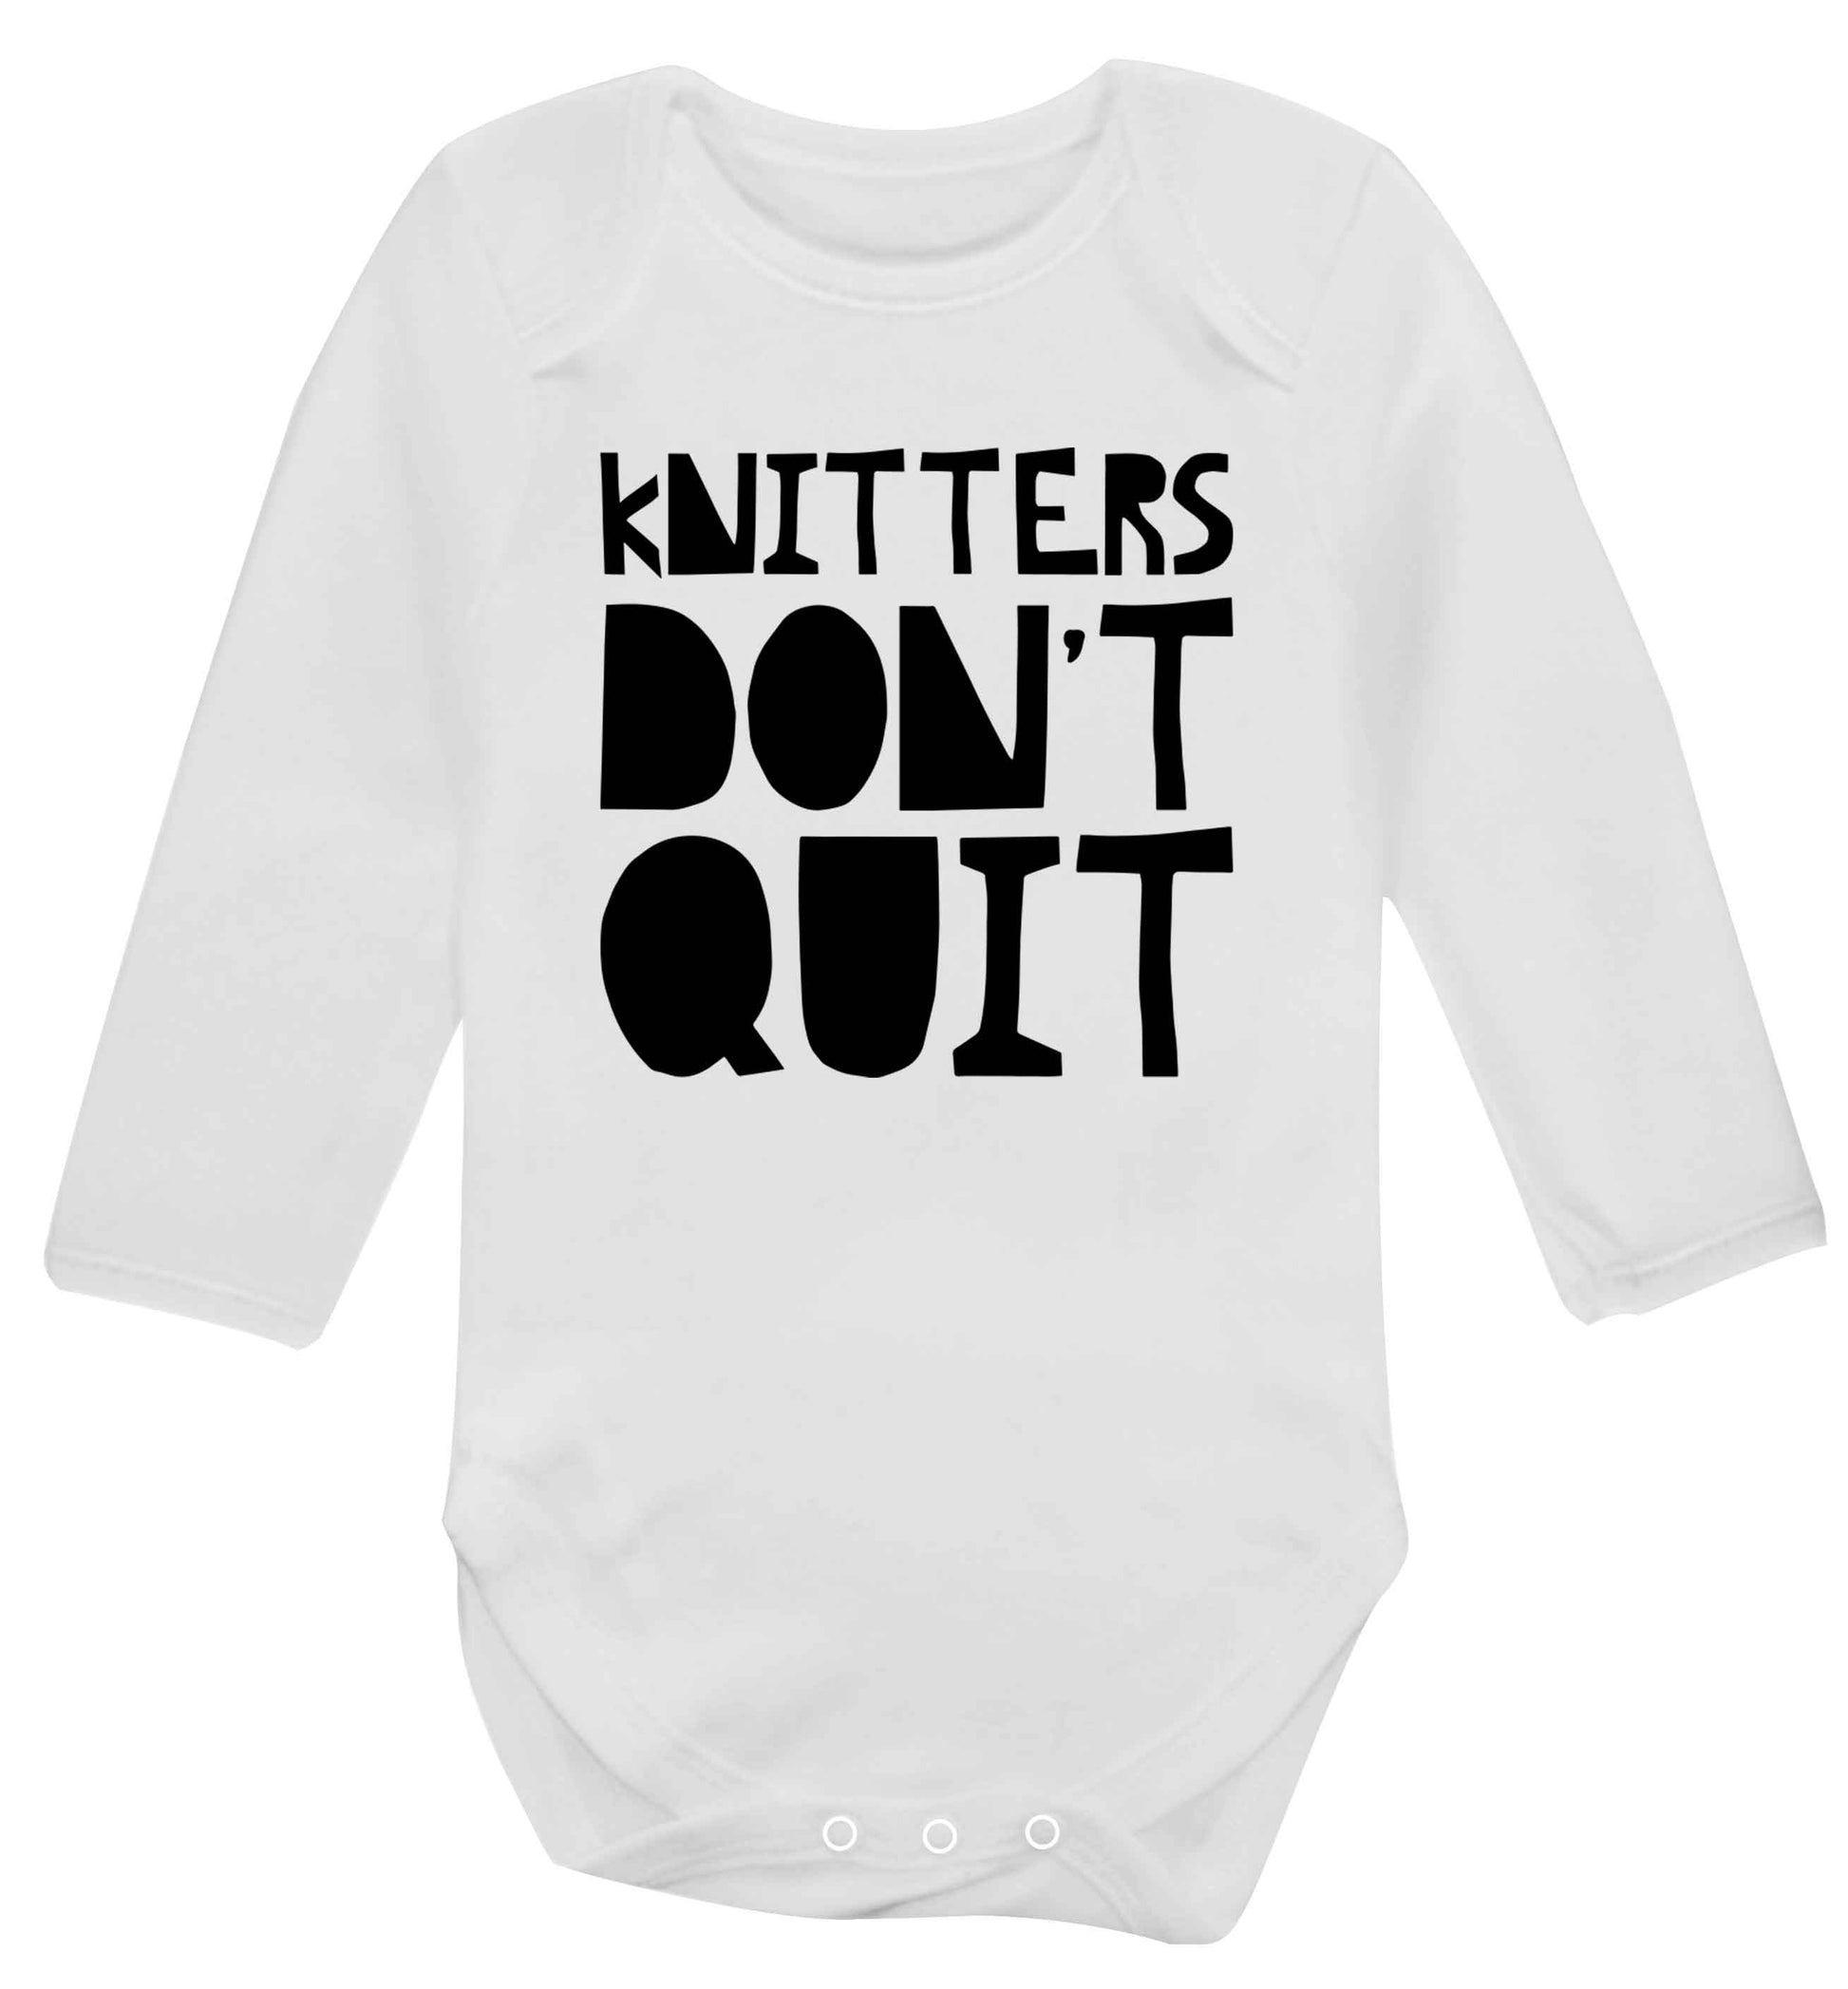 Knitters don't quit Baby Vest long sleeved white 6-12 months